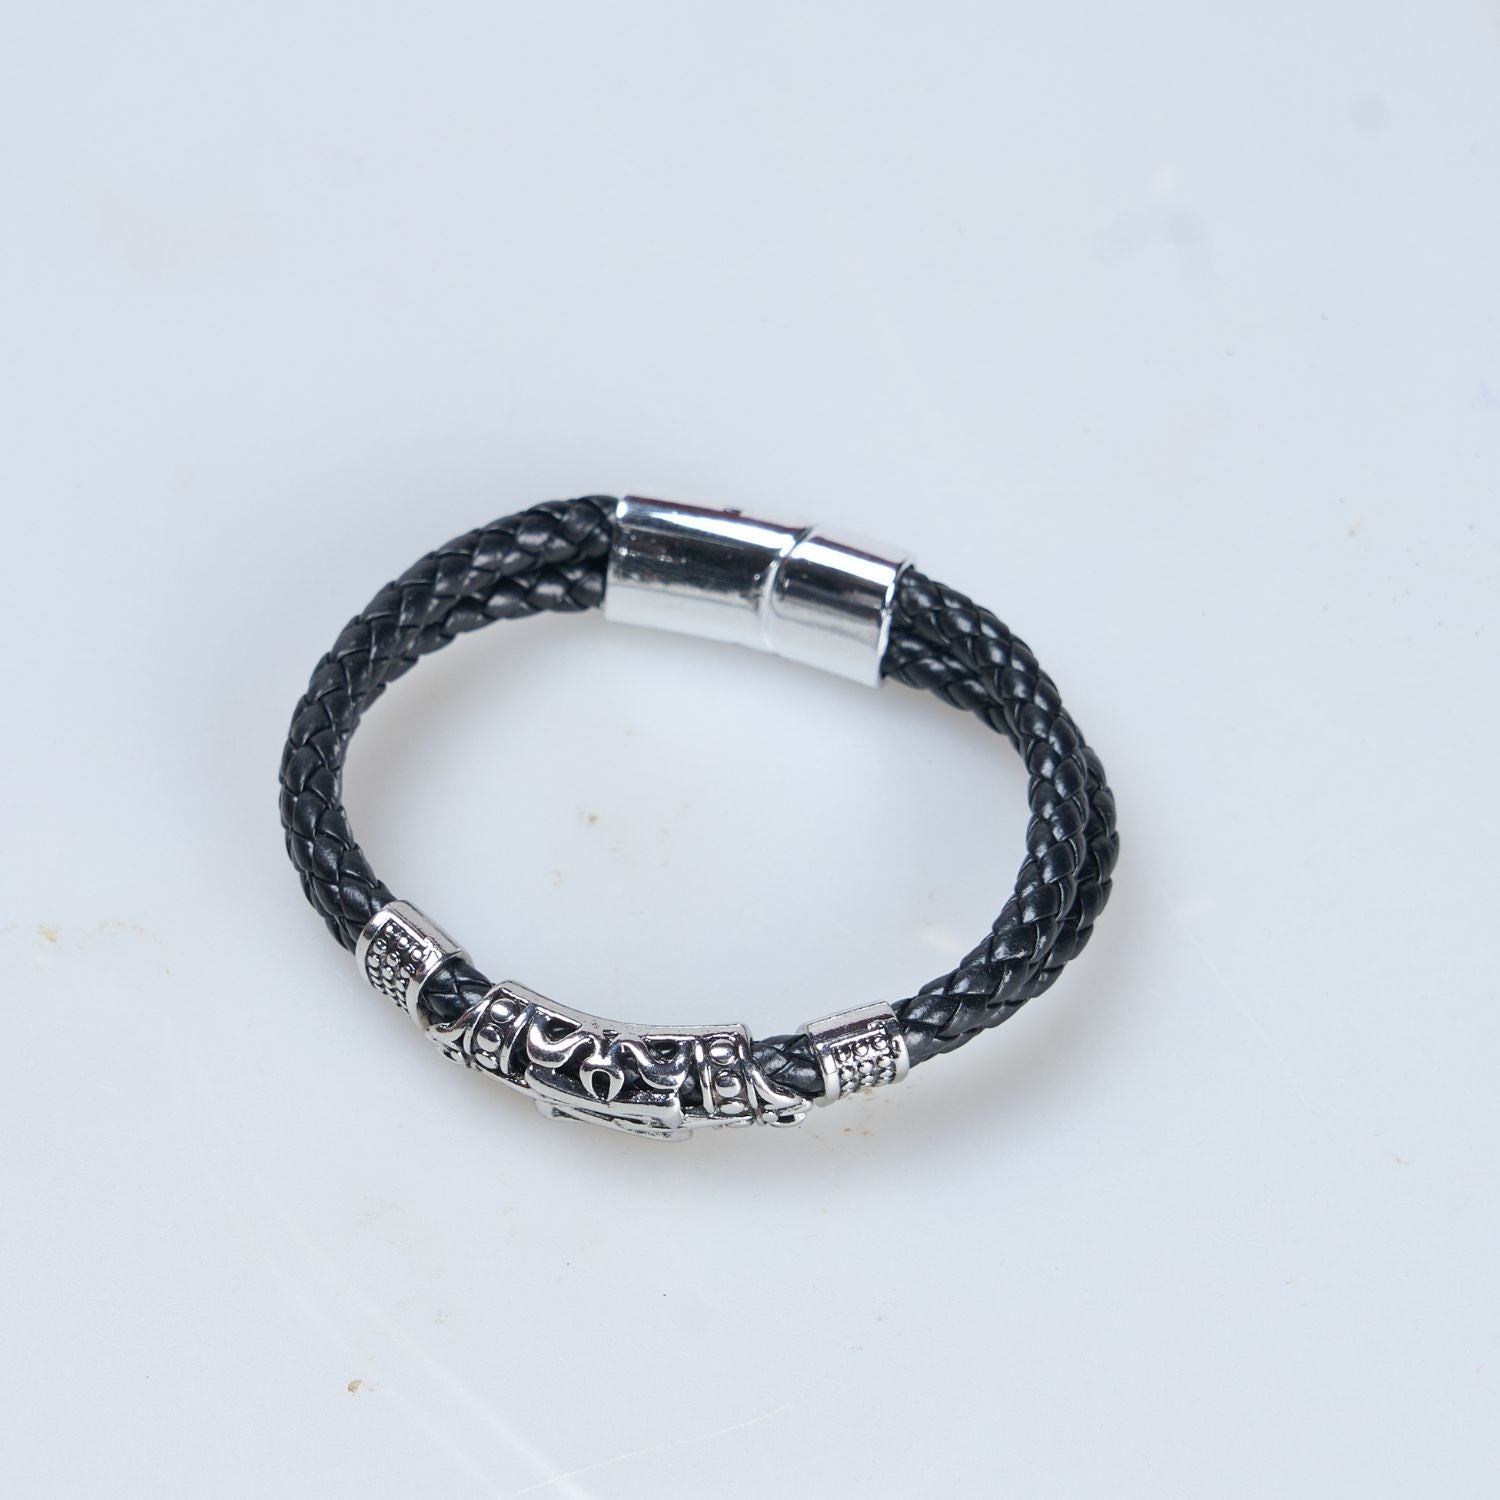 Black and Silver colored Bracelet for men with magnetic clasp